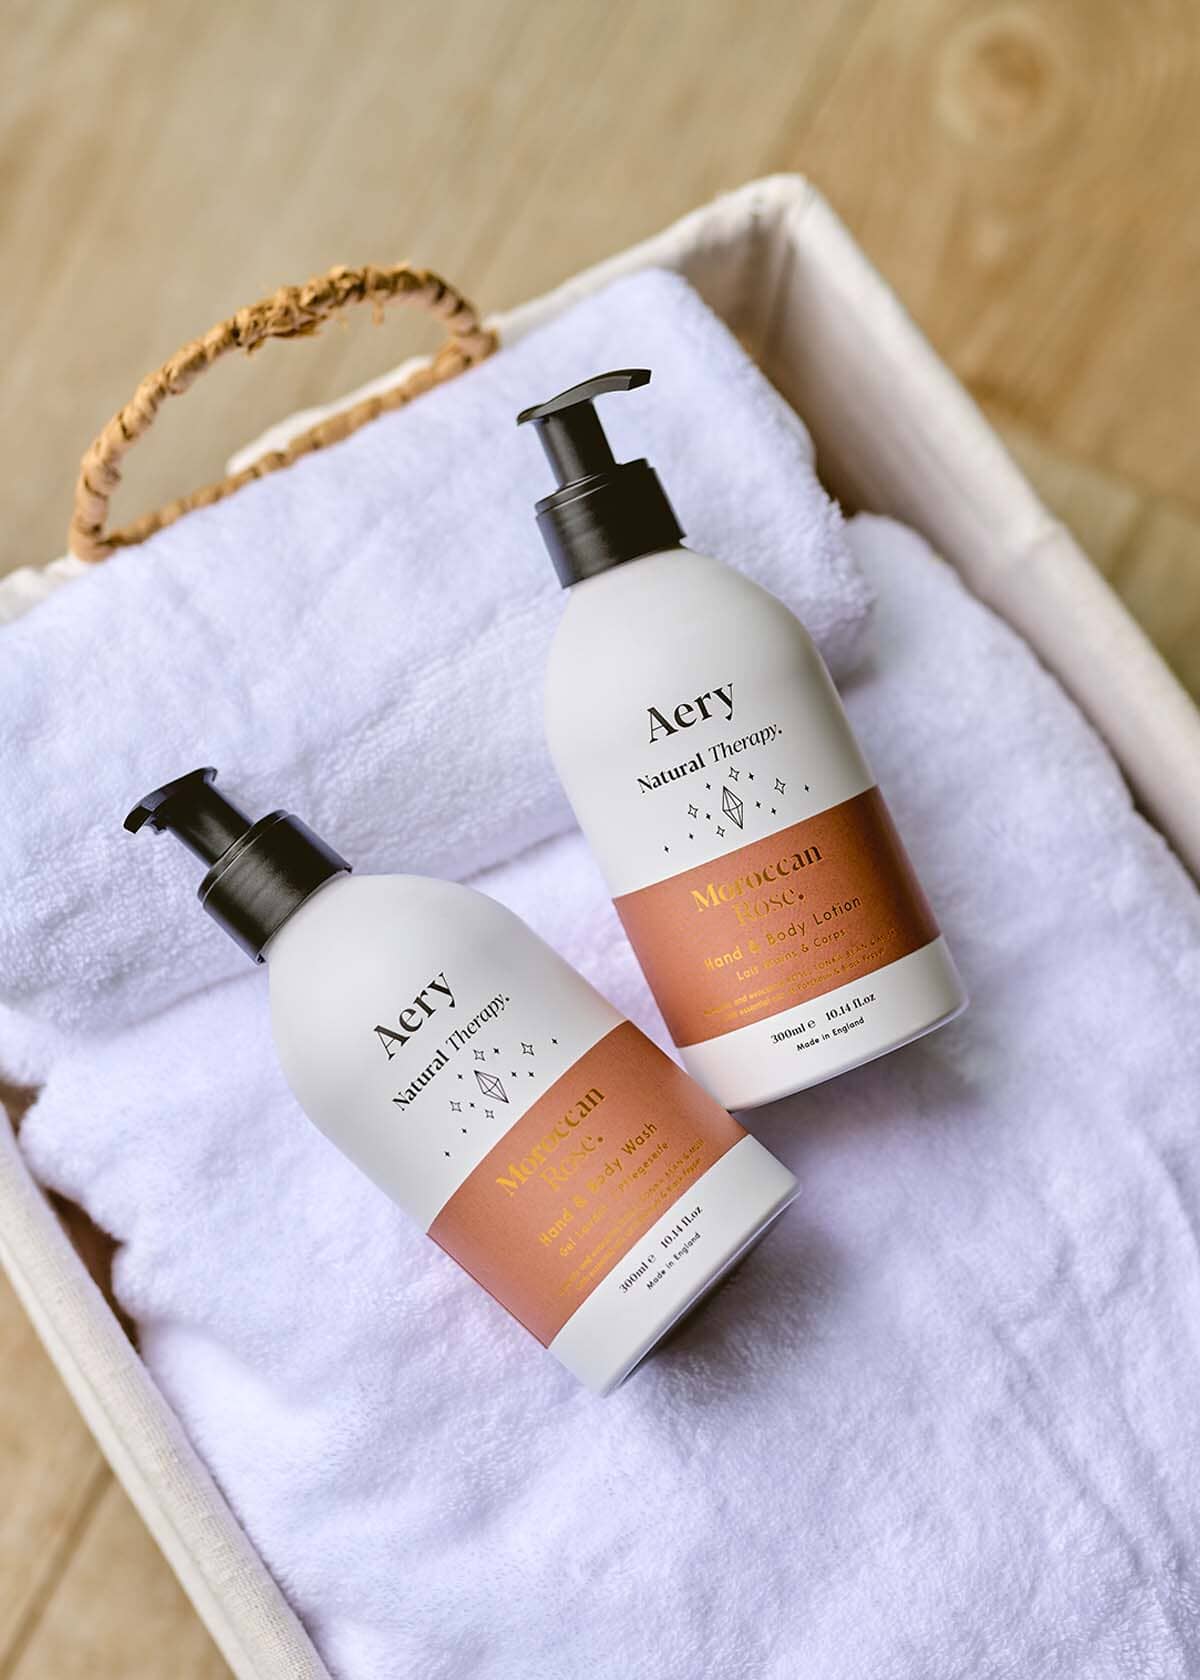 Aubergine Moroccan Rose hand and body wash and lotion duo by Aery displayed on white towel in basket